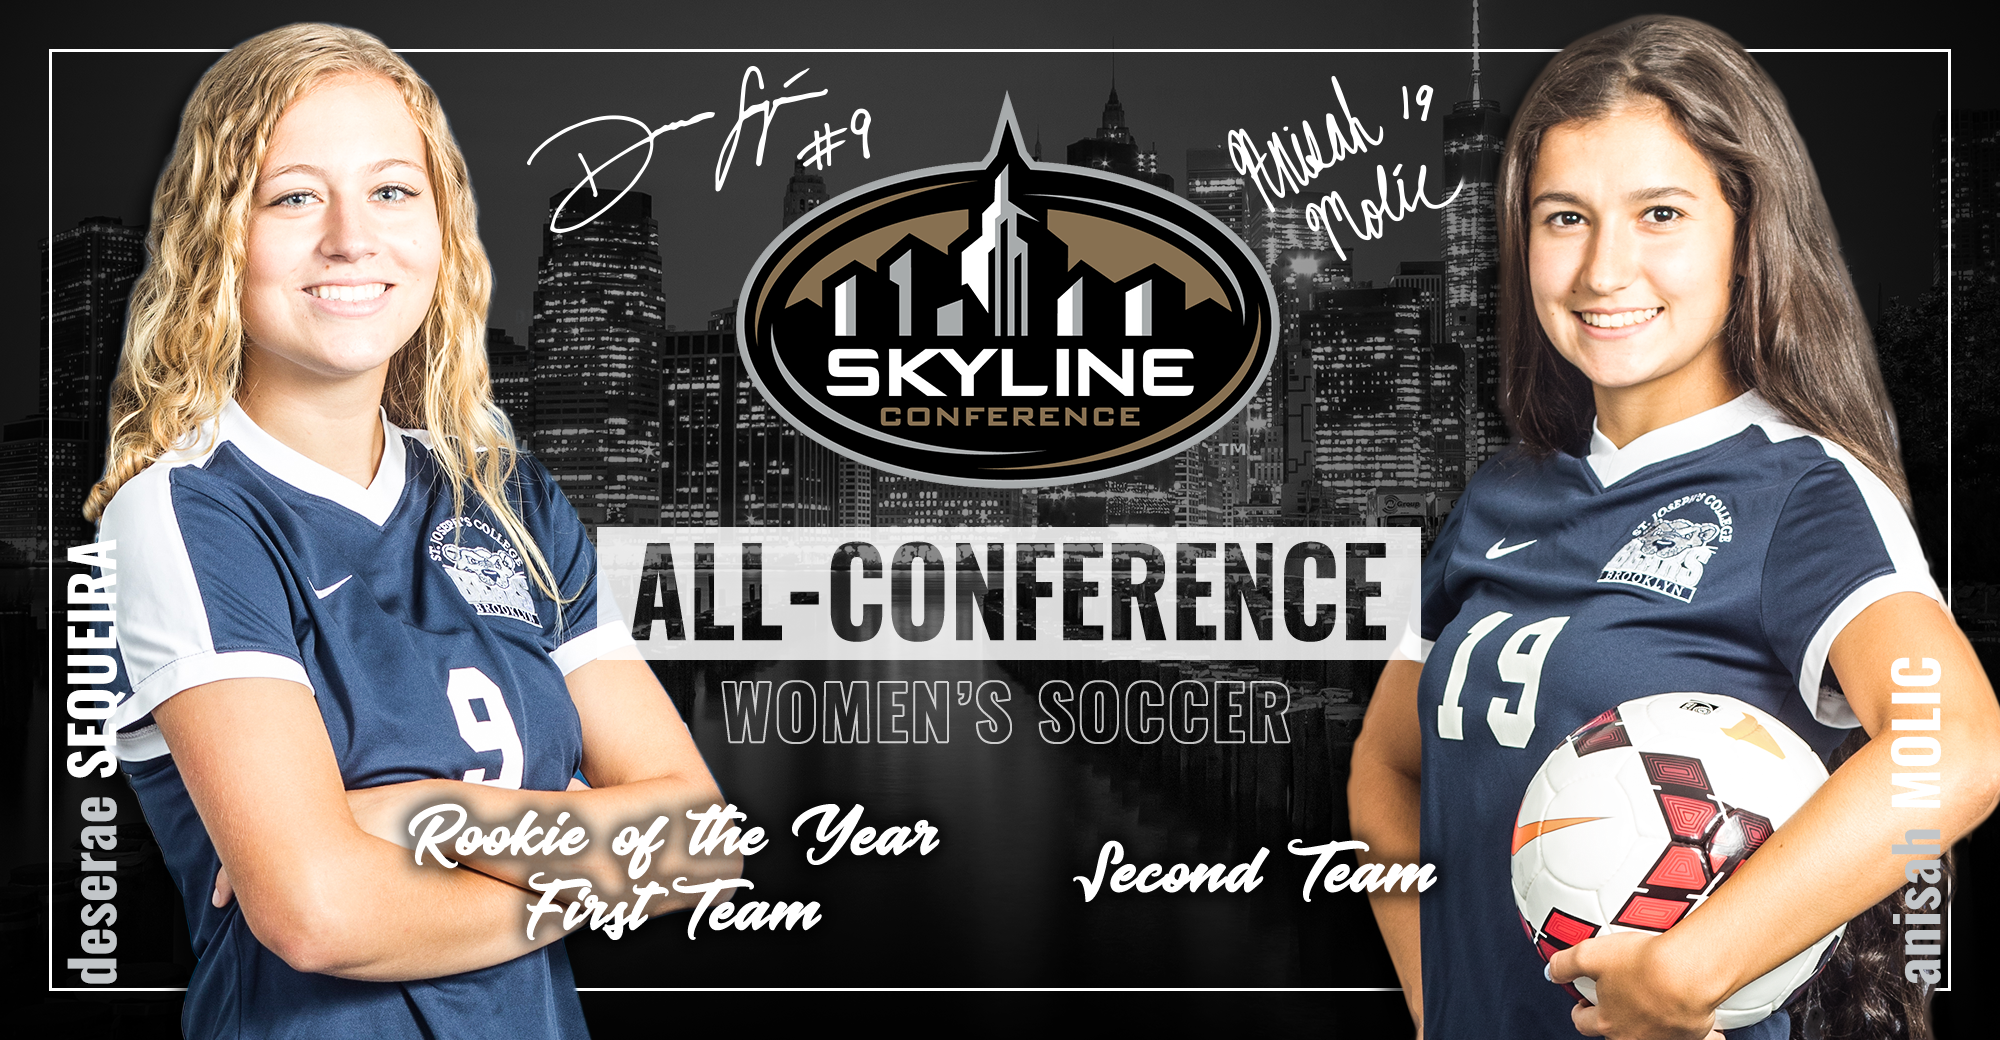 Sequeira Named Top Rookie as Sequeira and Molic Secure All-Skyline Women's Soccer Accolades